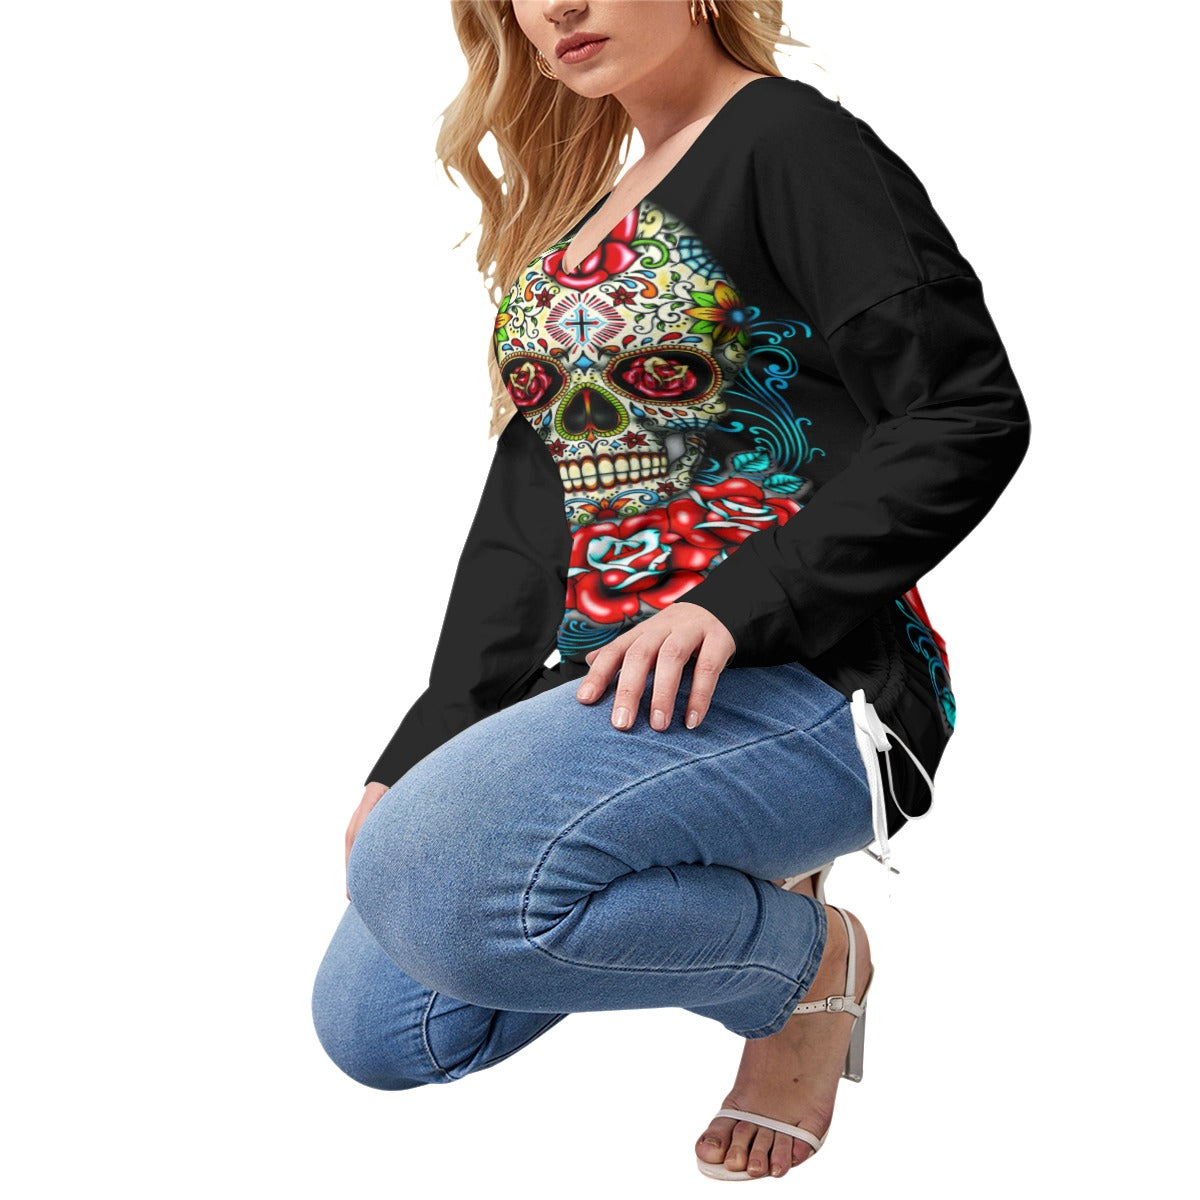 Day of the dead skull Women’s V-neck T-shirt With Side Drawstring(Plus Size)